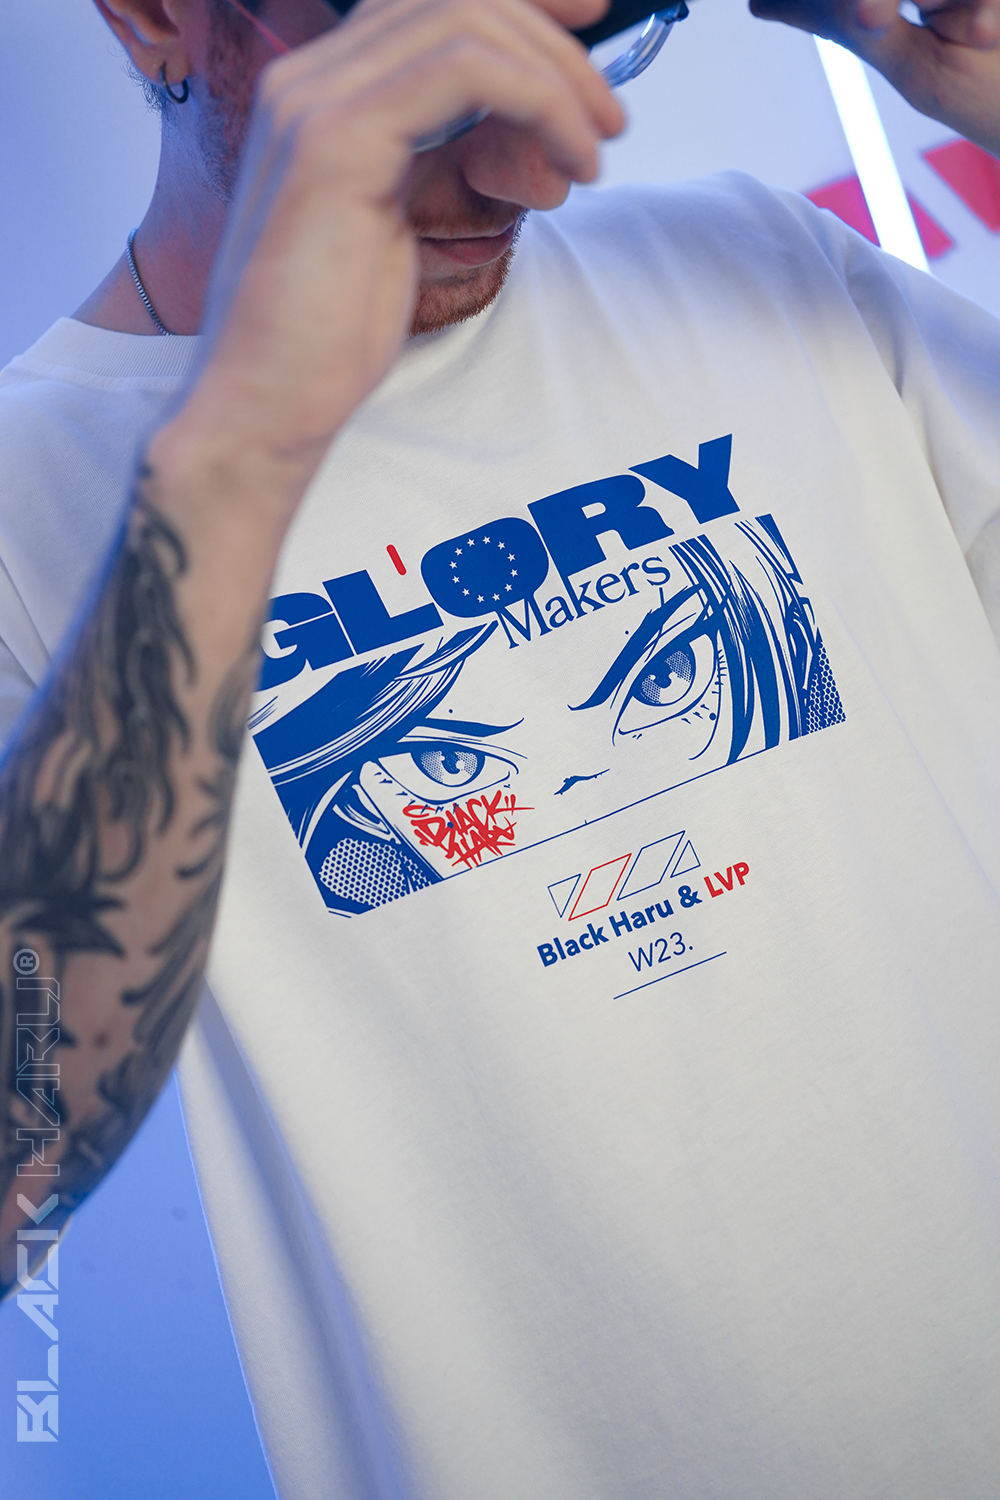 GLORY Makers Tee x LVP (Oversize) (Limited)